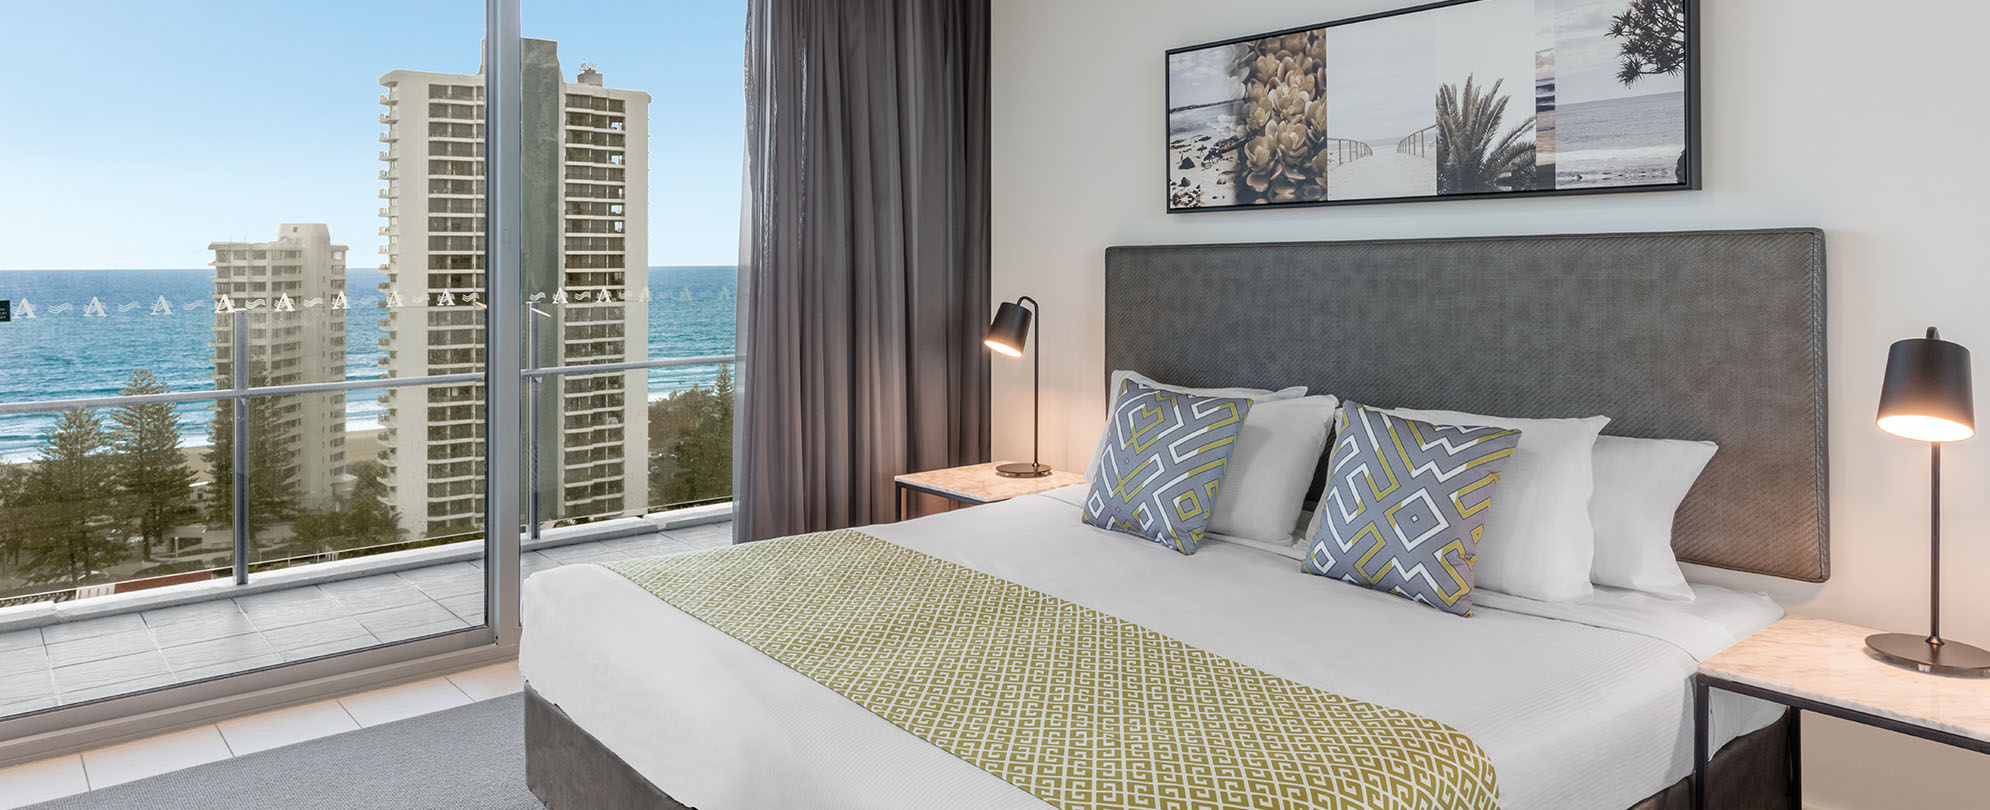 The bedroom and ocean view of a 1-bedroom suite at Club Wyndham Surfers Paradise.